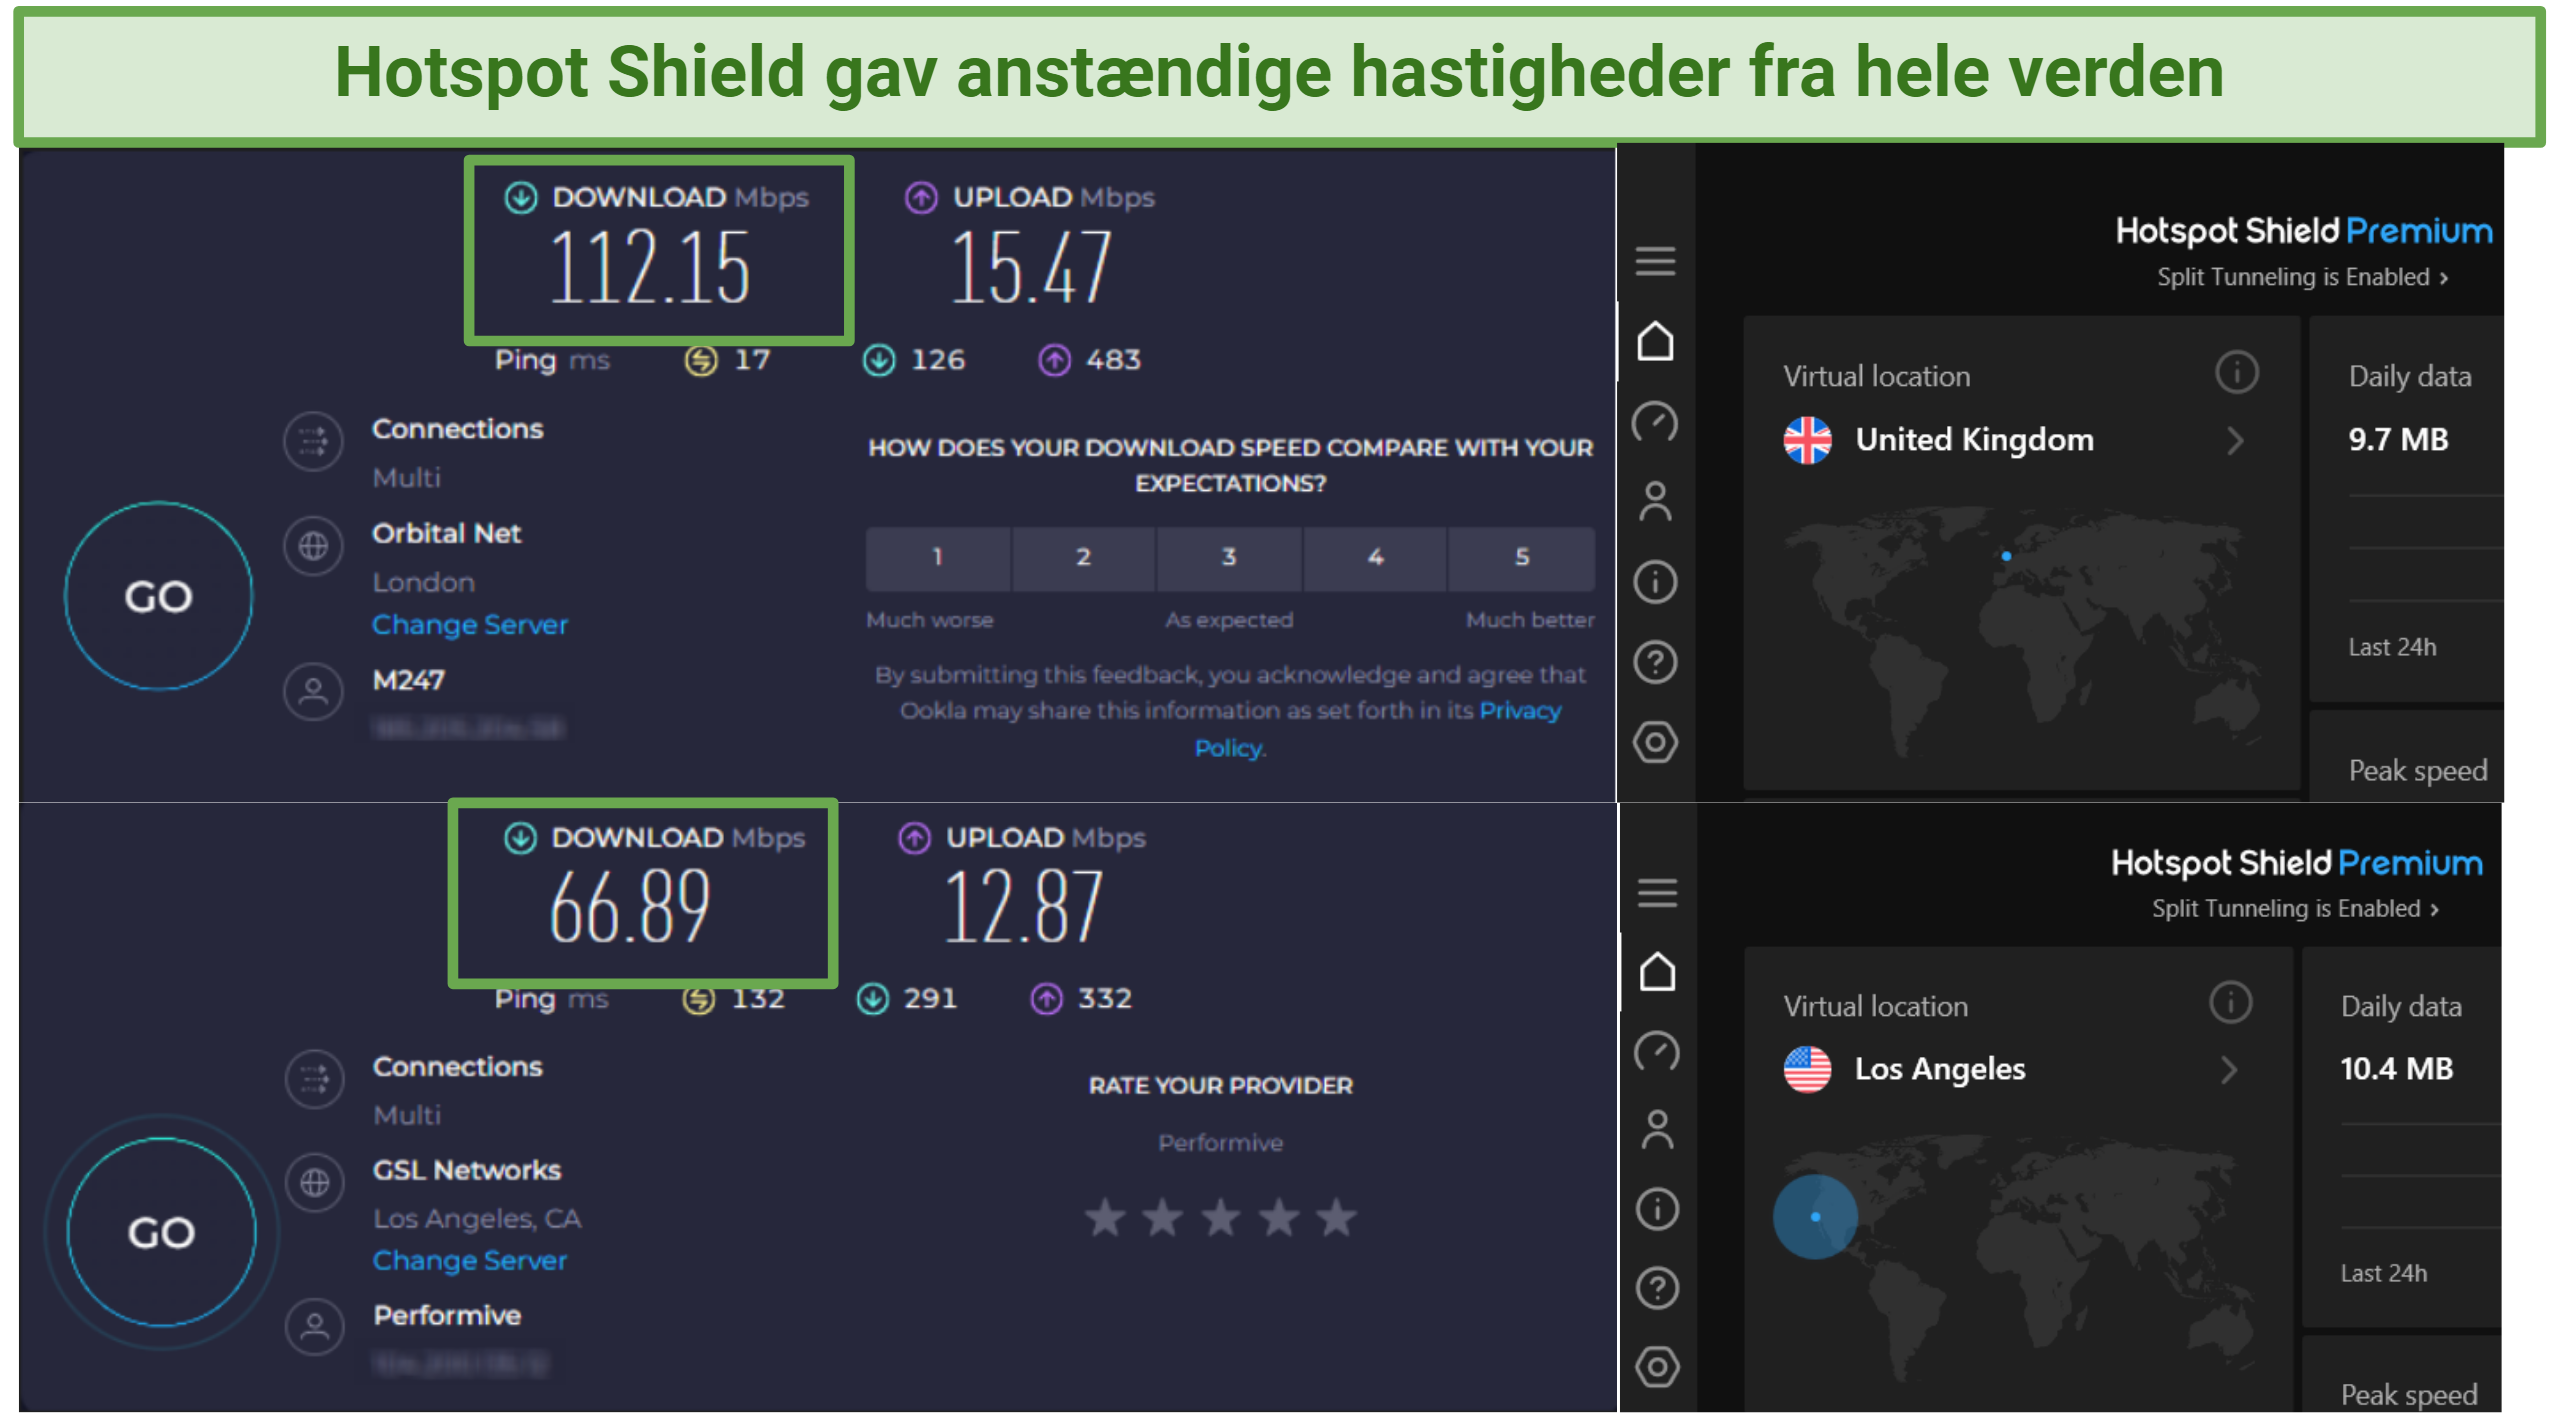 Hotspot Shield's speed test results in LA and London